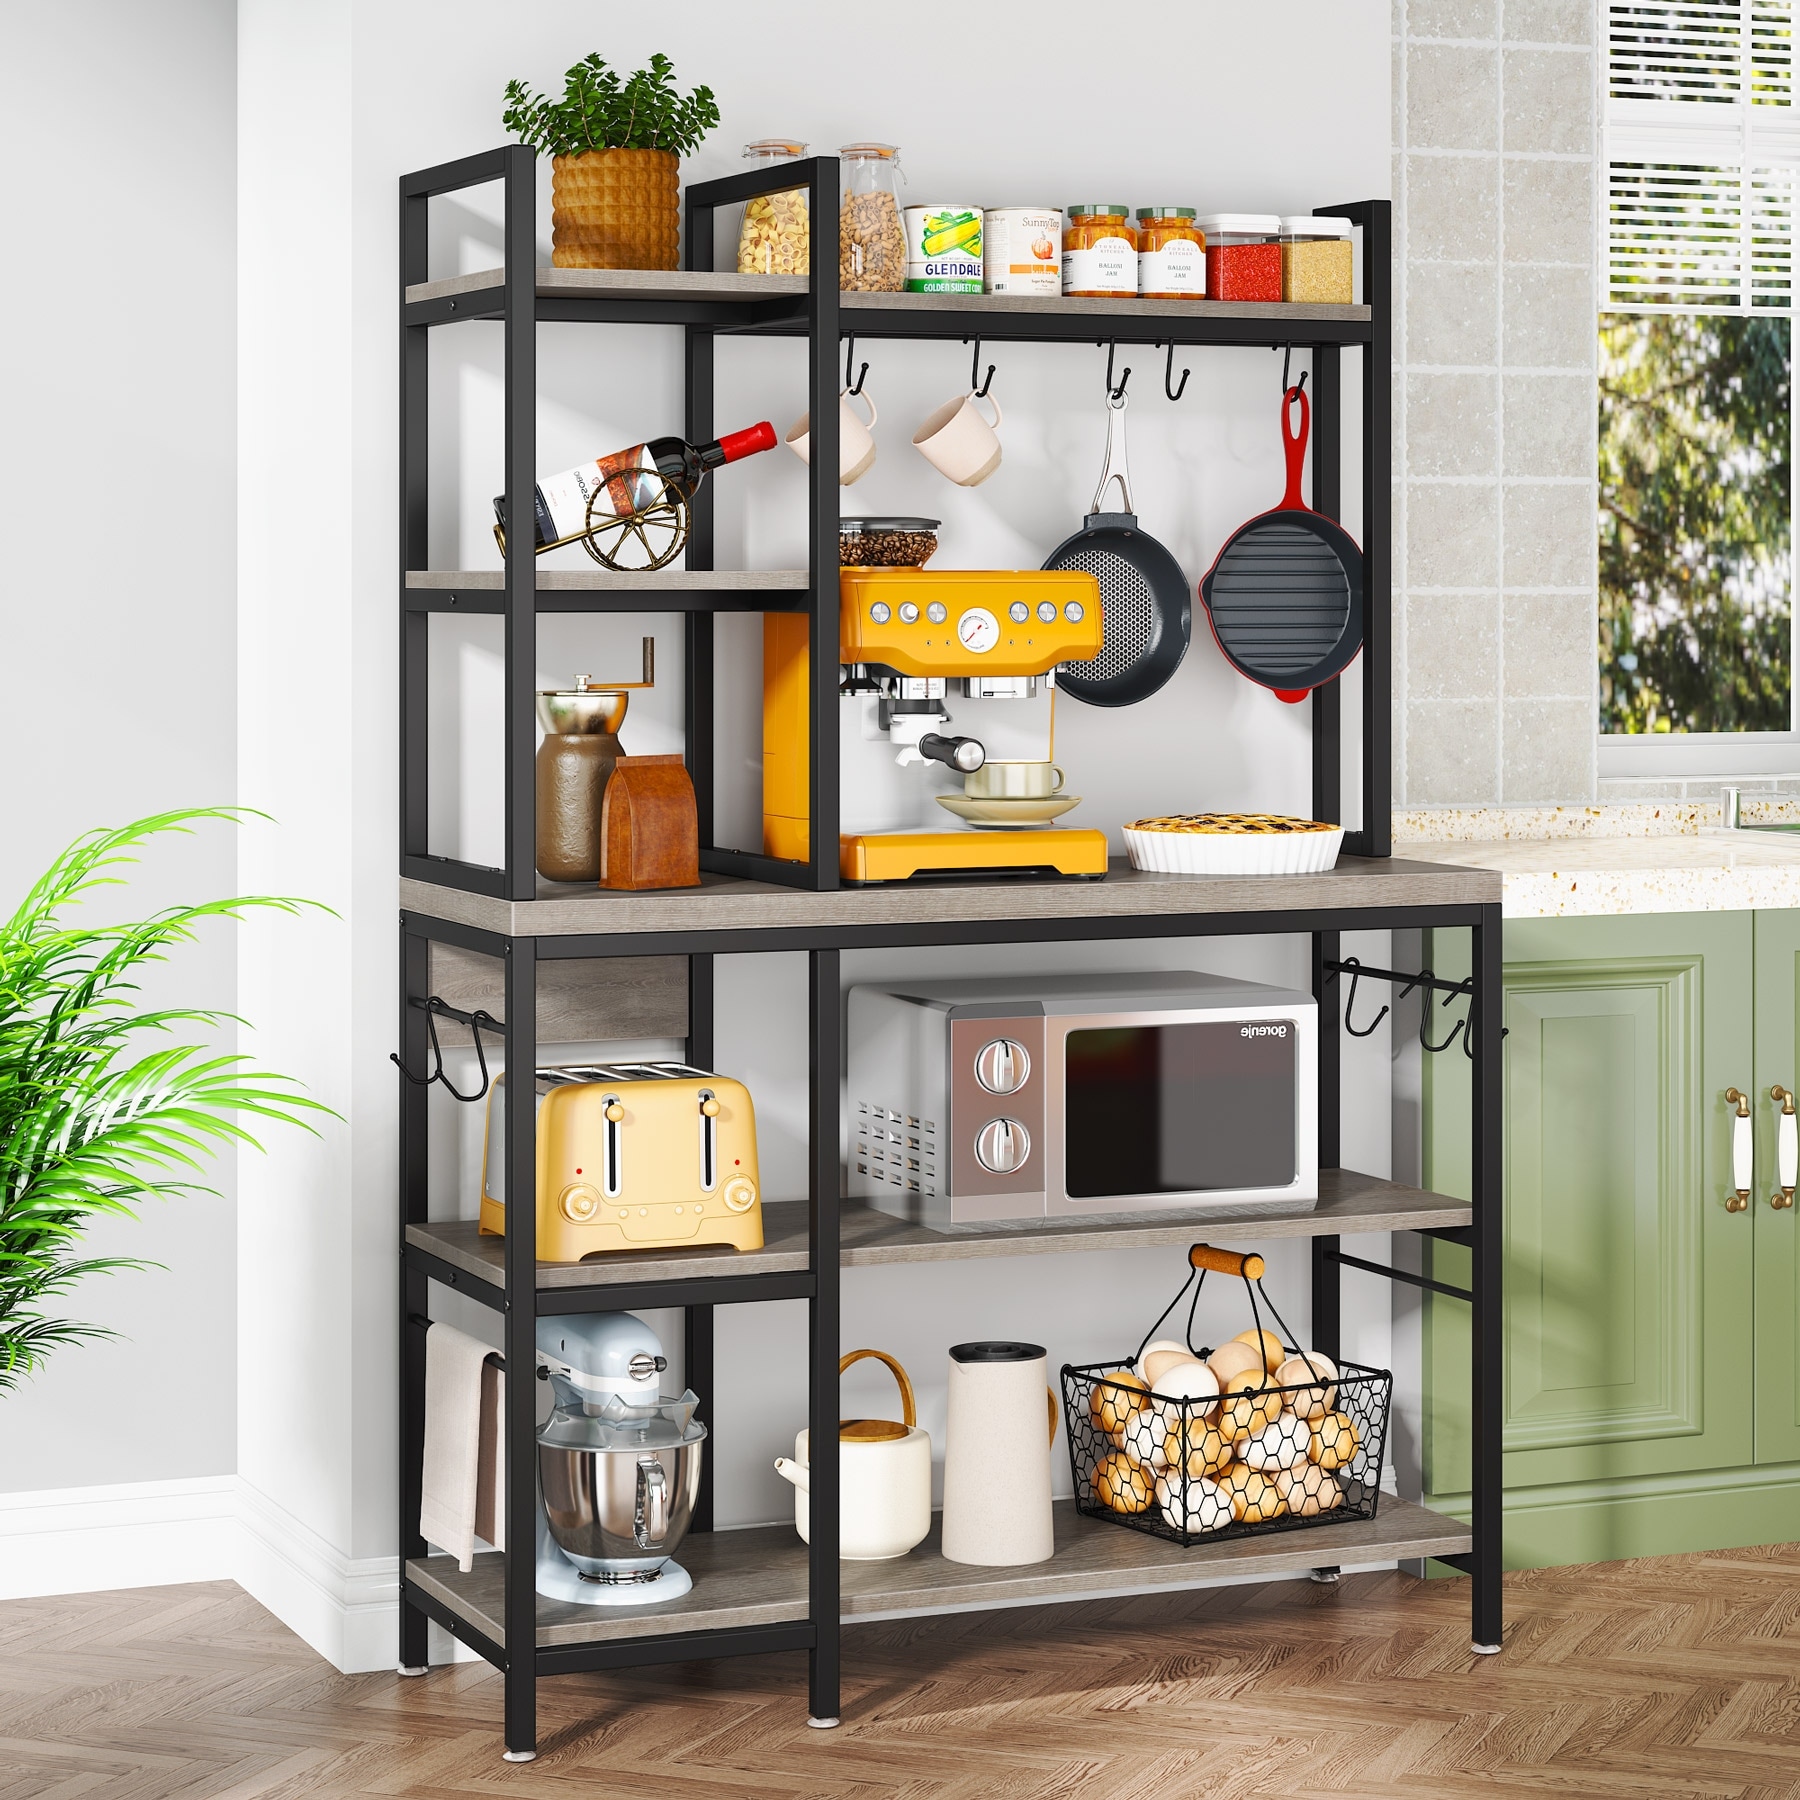 https://ak1.ostkcdn.com/images/products/is/images/direct/3e6ed9b051c46c9ac22f2588a2e74132447047e3/Brown-Industrial-Wood-Bakers-Rack-with-Storage%2CBlack-Modern-Microwave-Oven-Stand%2C5-Tier-Kitchen-Utility-Storage-Shelf.jpg